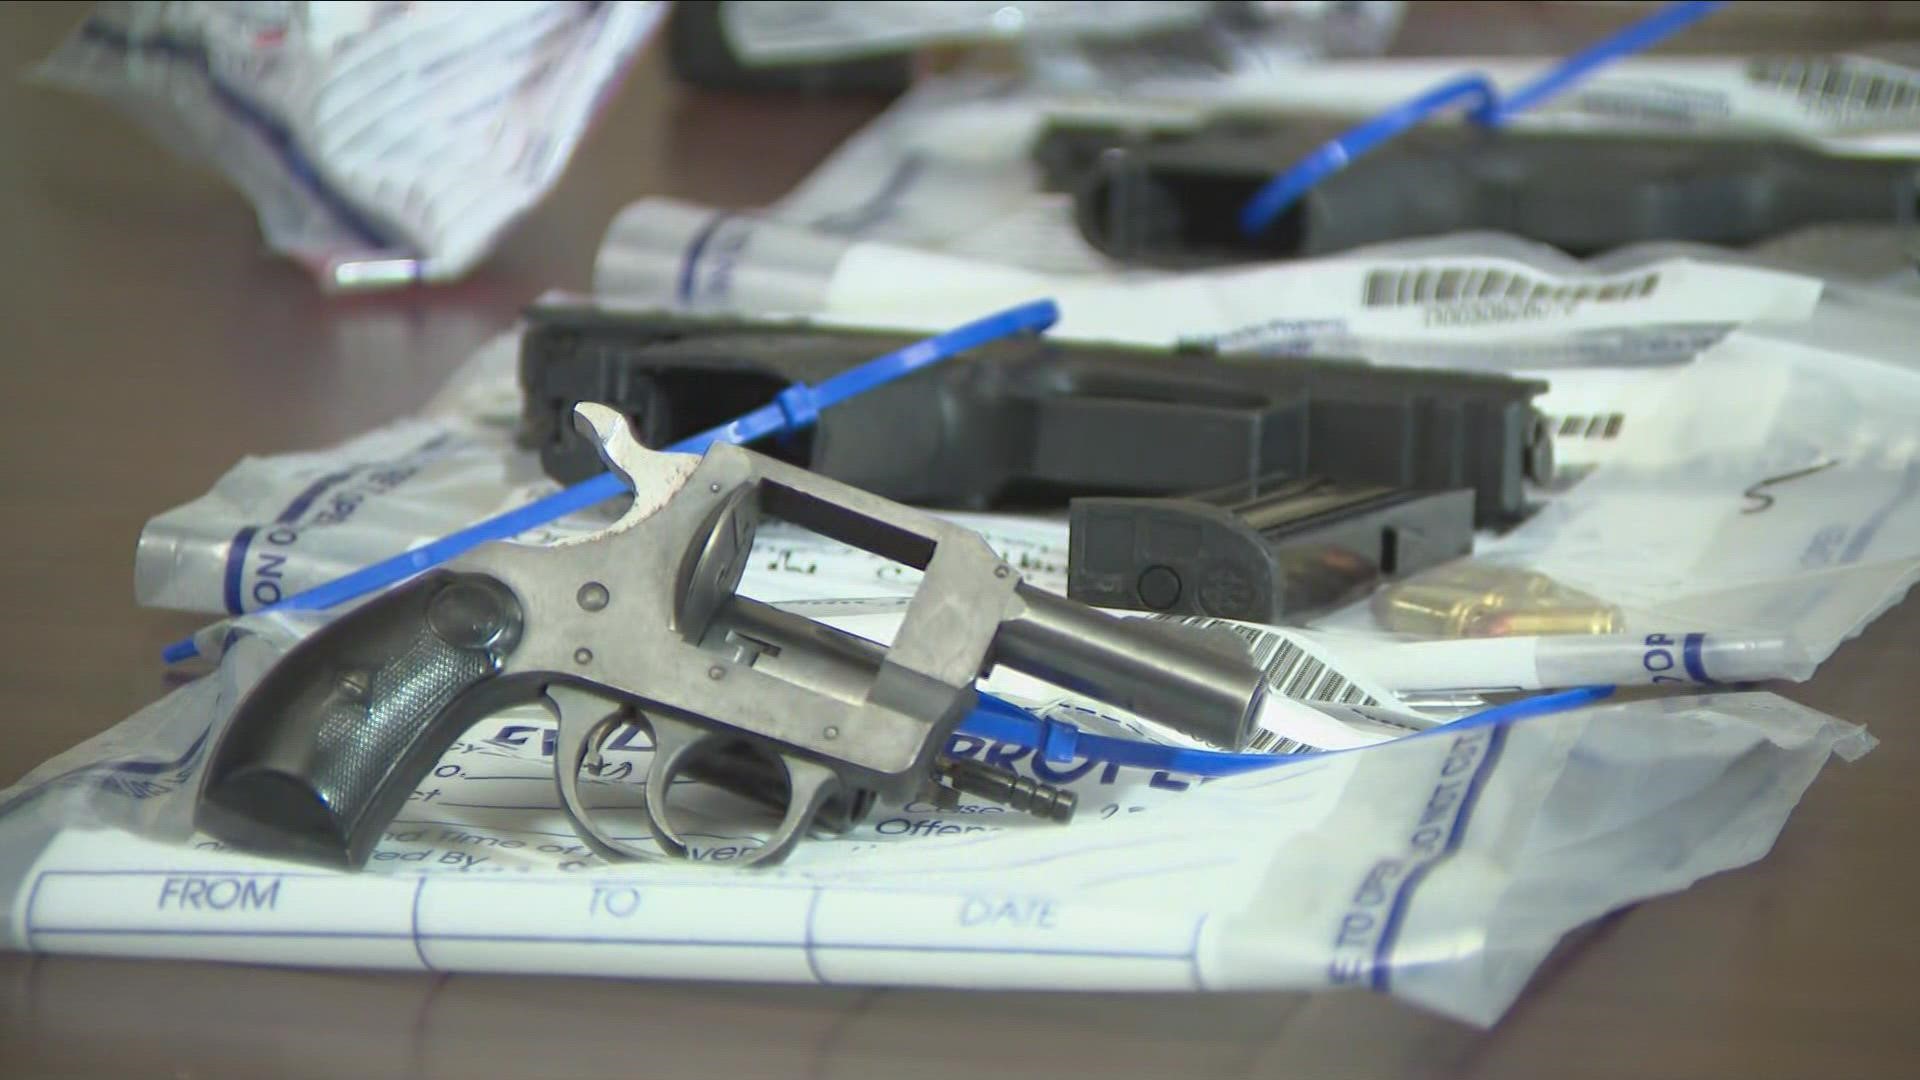 The NYSP reported an 104% increase in gun seizures this year, compared to 2021, in part, due to an investigation that led to the recovery of dozens of firearms.